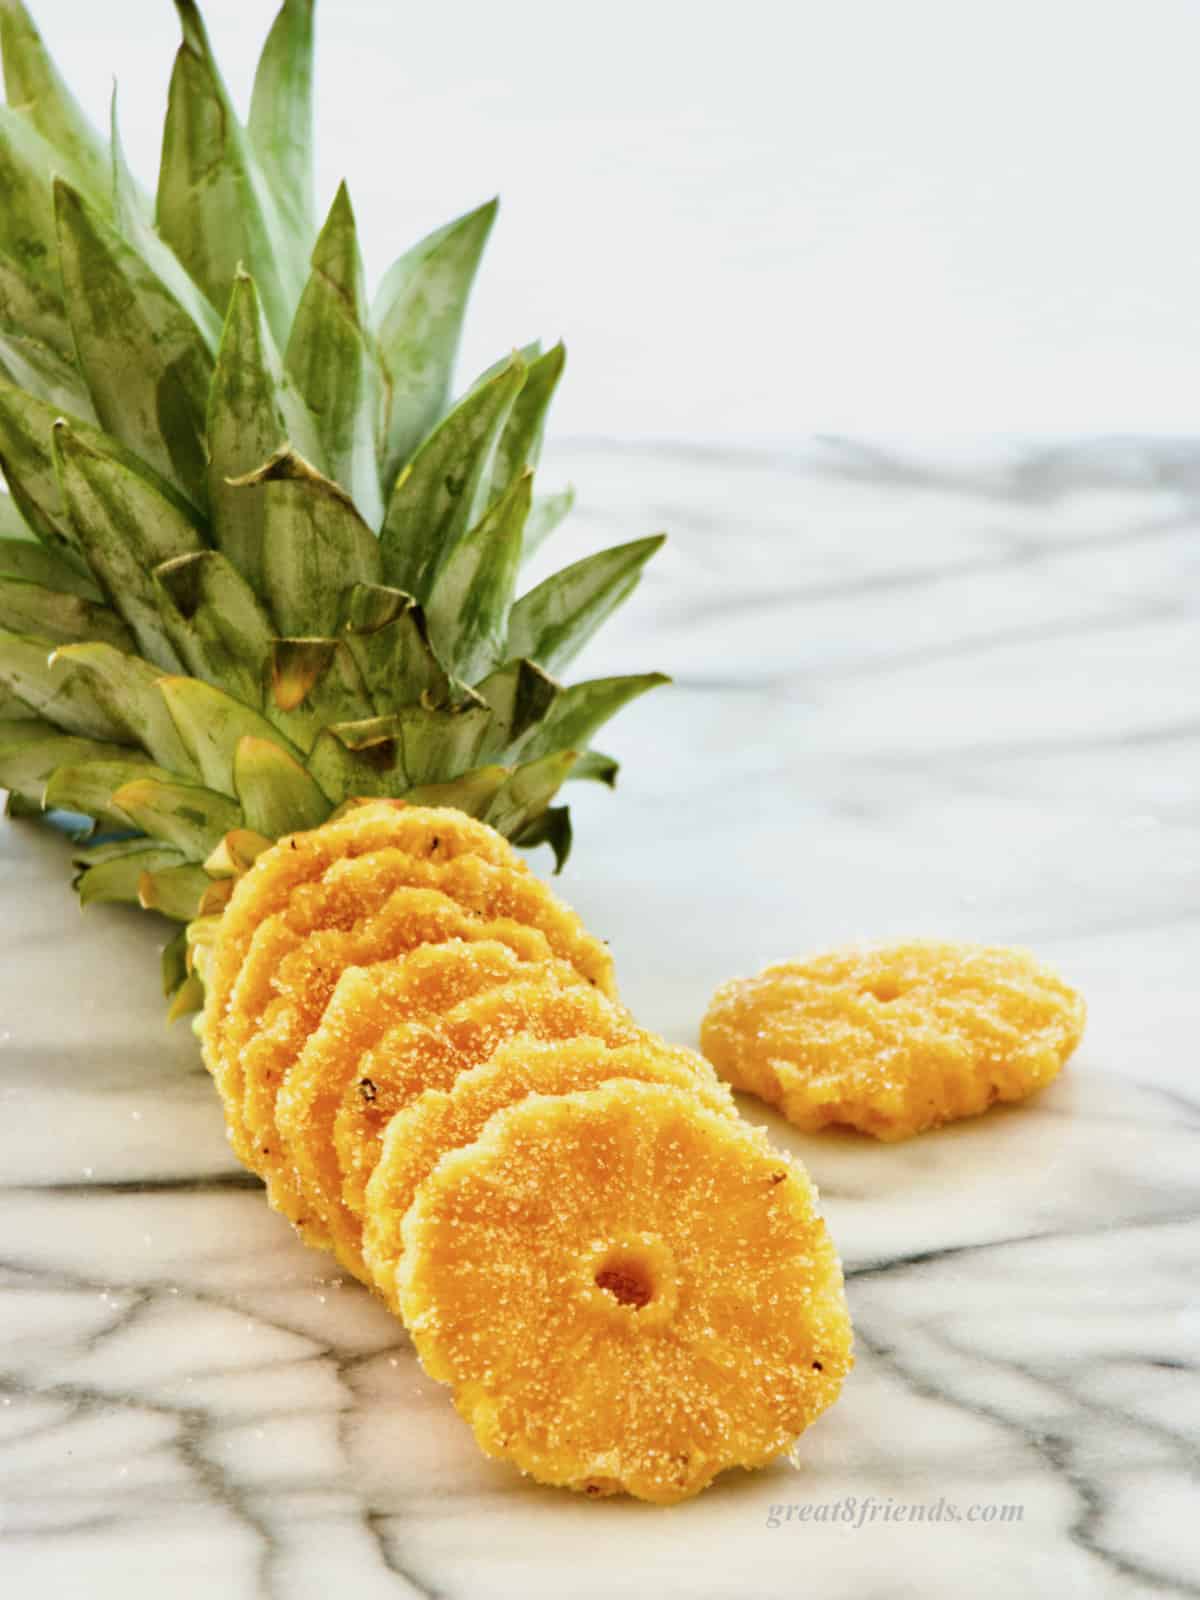 Candied pineapple slices lined up with a pineapple top at the back.